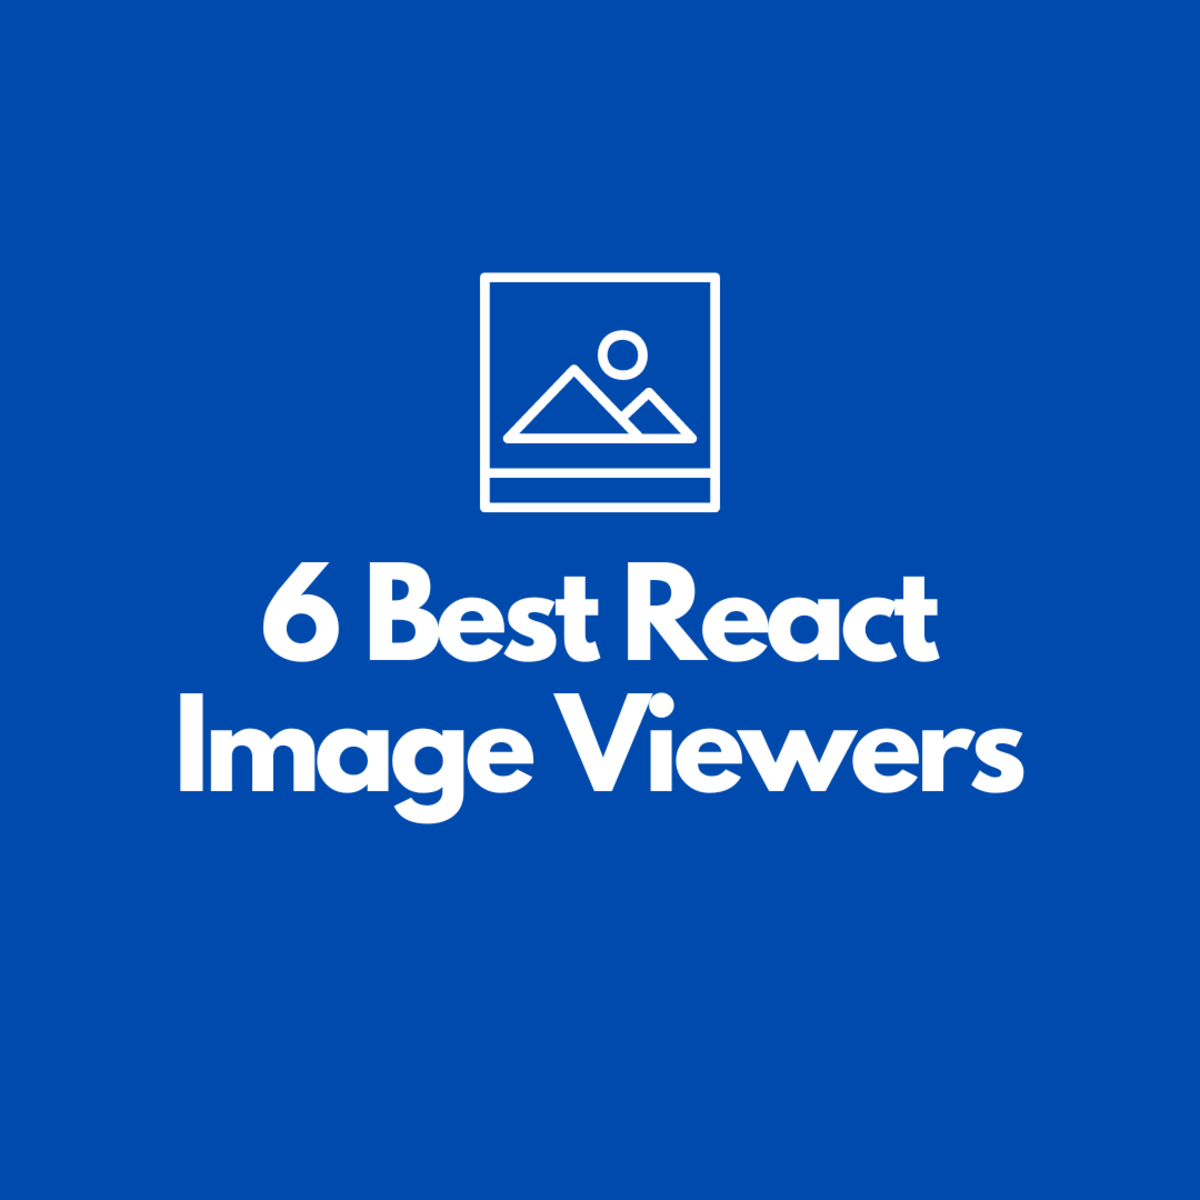 6 Best React Image Viewers to Check Out: The Ultimate List